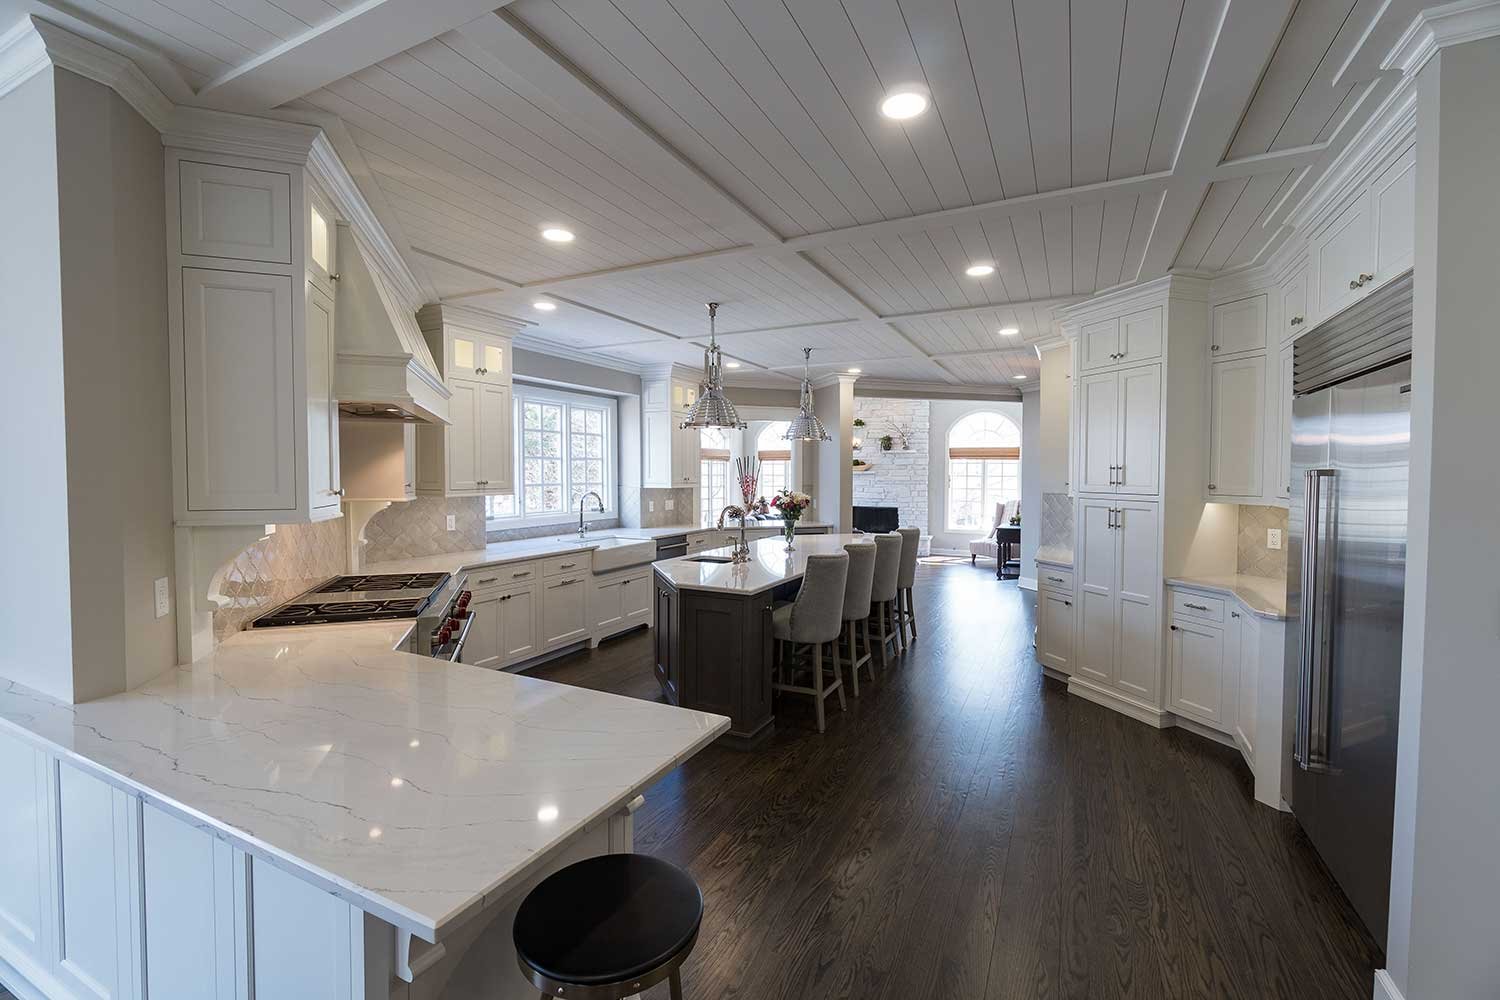 Beautiful and open pure white kitchen remodel with a very large kitchen counter, an island with bar stool seating, and a butler's pantry for more storage